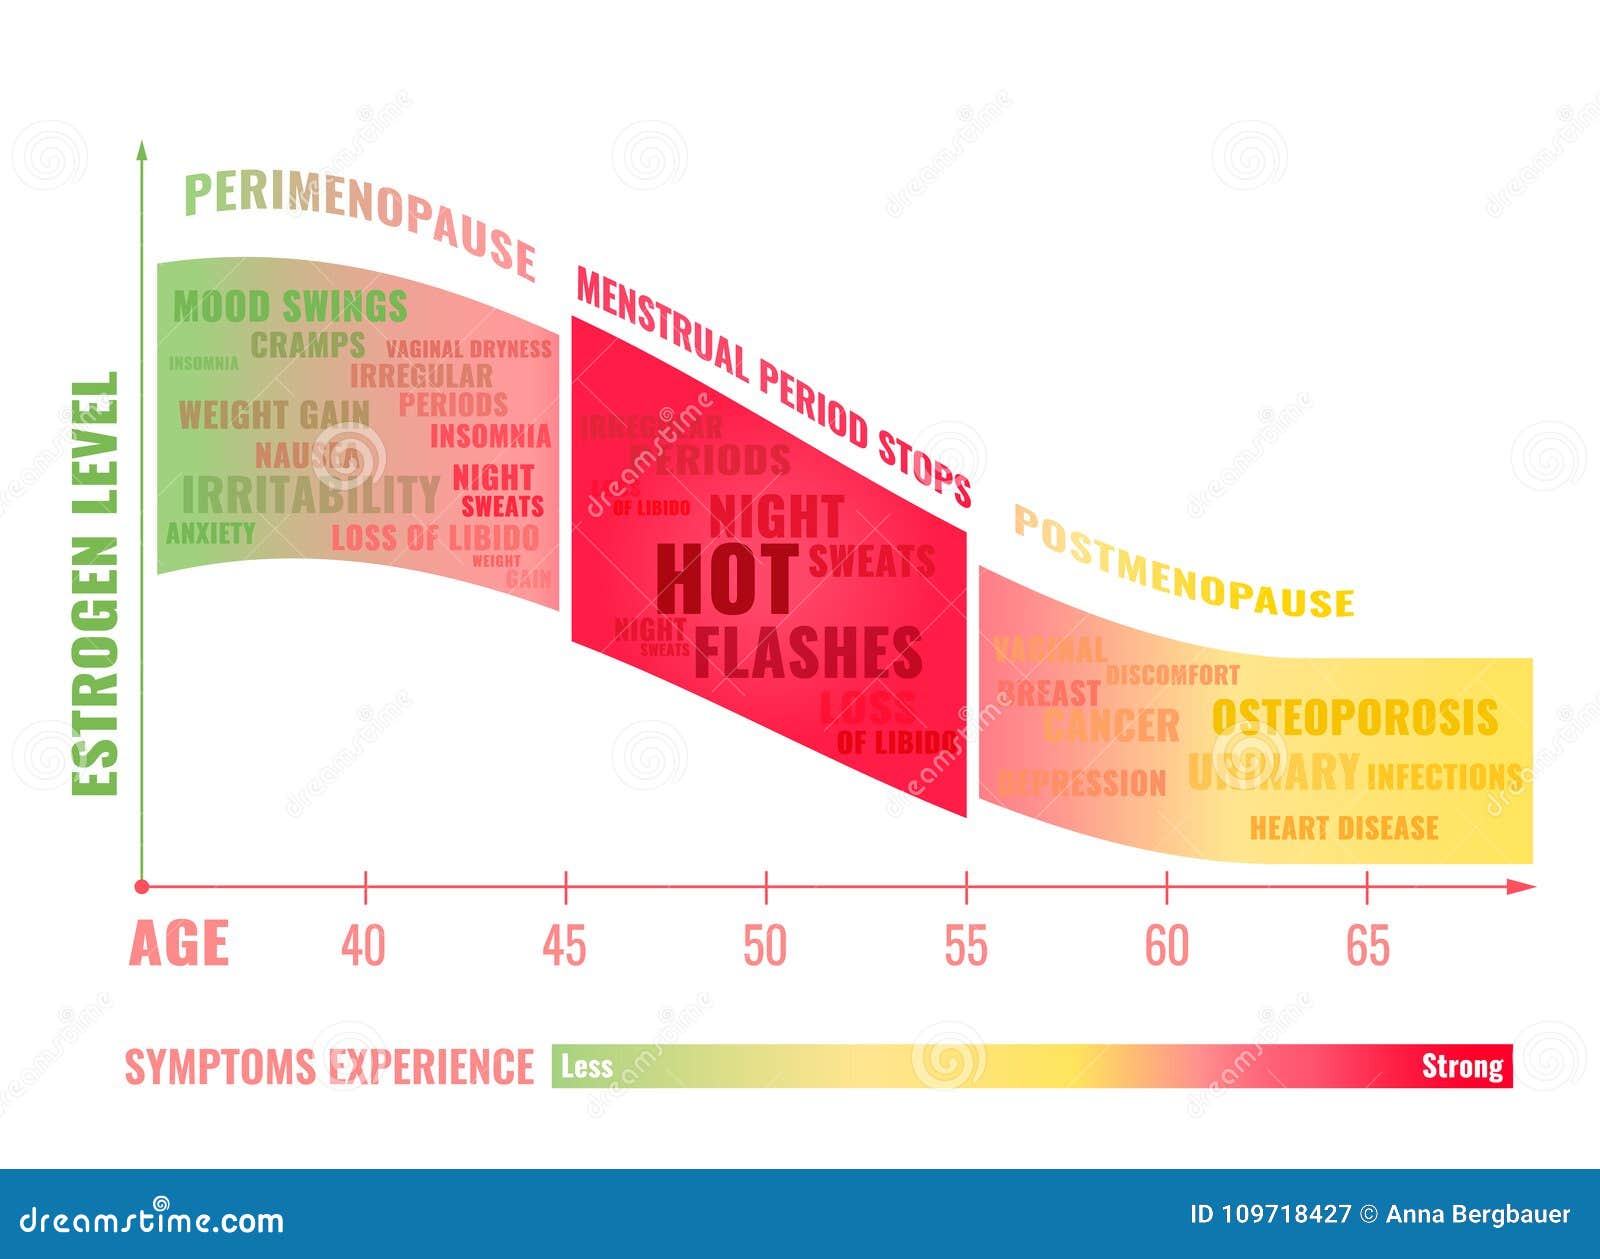 stages of menopause infographic